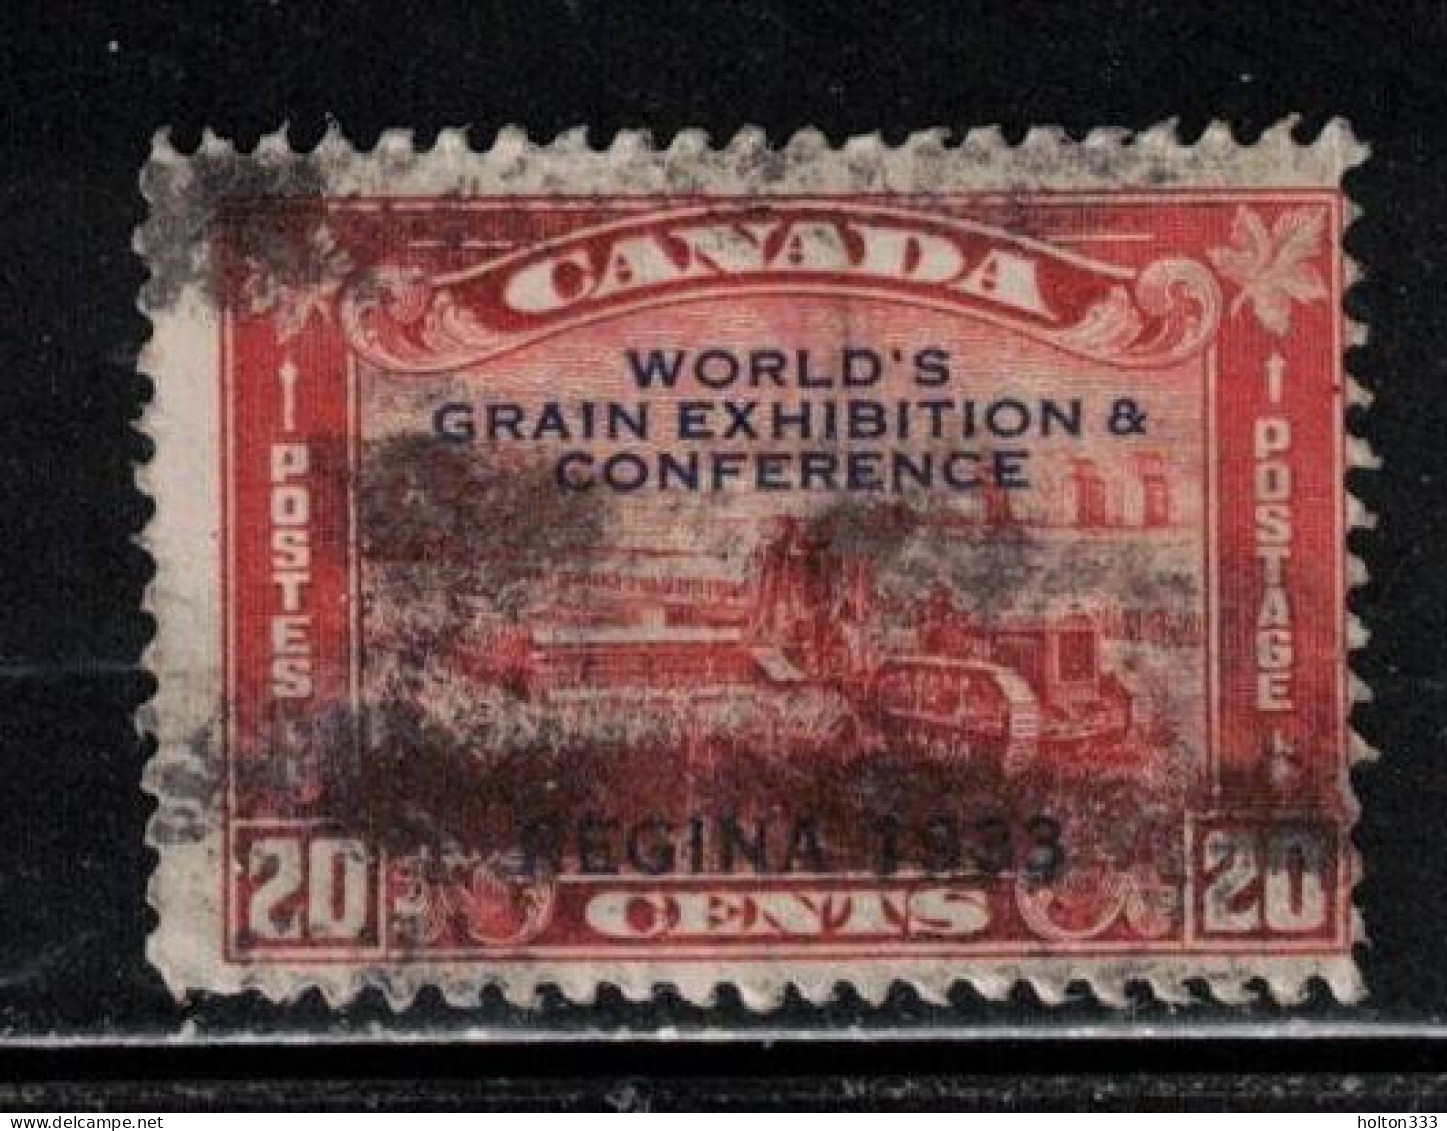 CANADA Scott # 203 Used - Harvesting Wheat With Grain Exhibition Overprint - Used Stamps